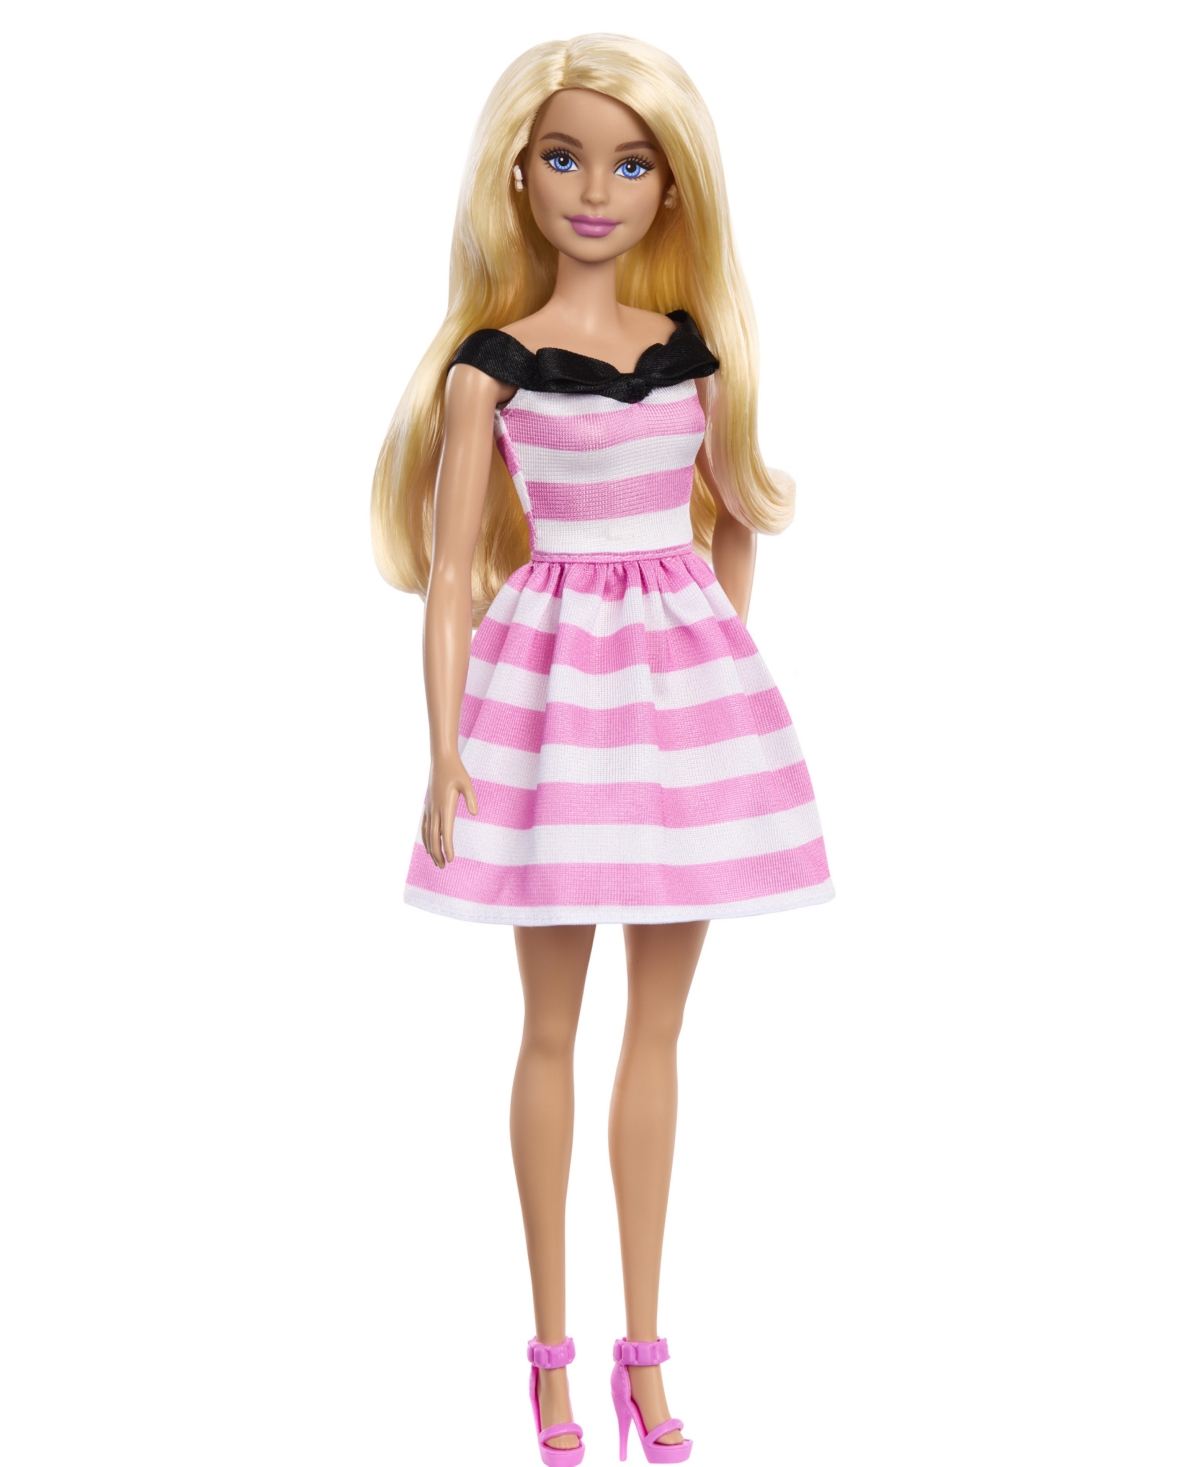 Shop Barbie 65th Anniversary Fashion Doll With Blonde Hair, Pink Striped Dress And Accessories In Multi